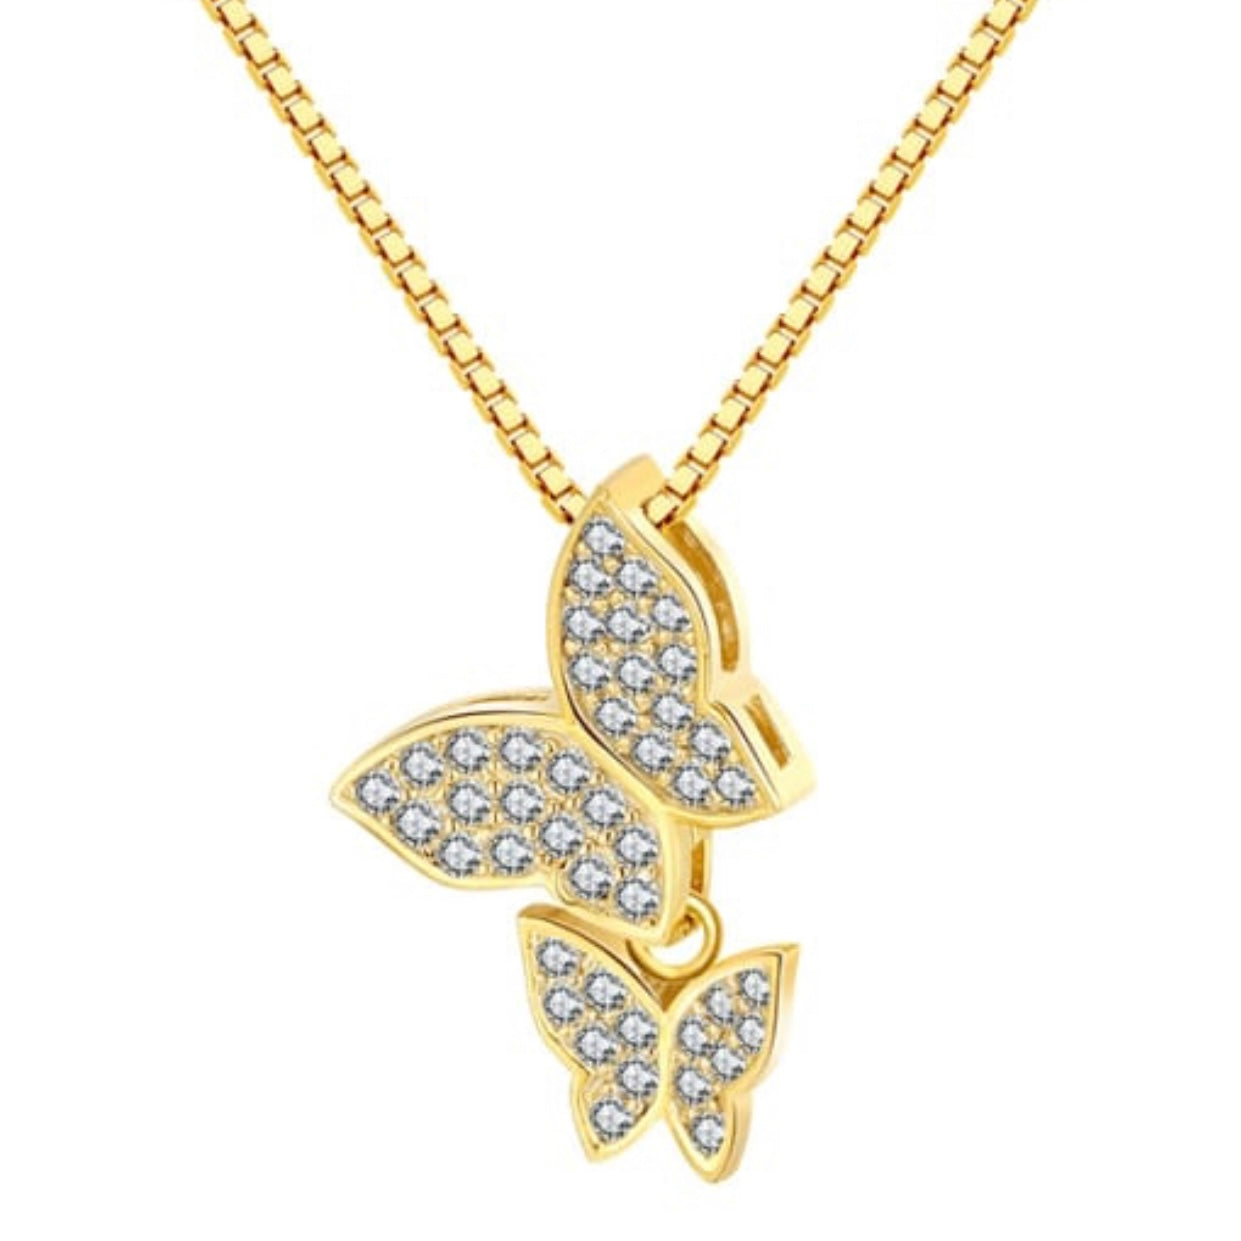 OMBRA DAINTY STERLING SILVER BUTTERFLY NECKLACE